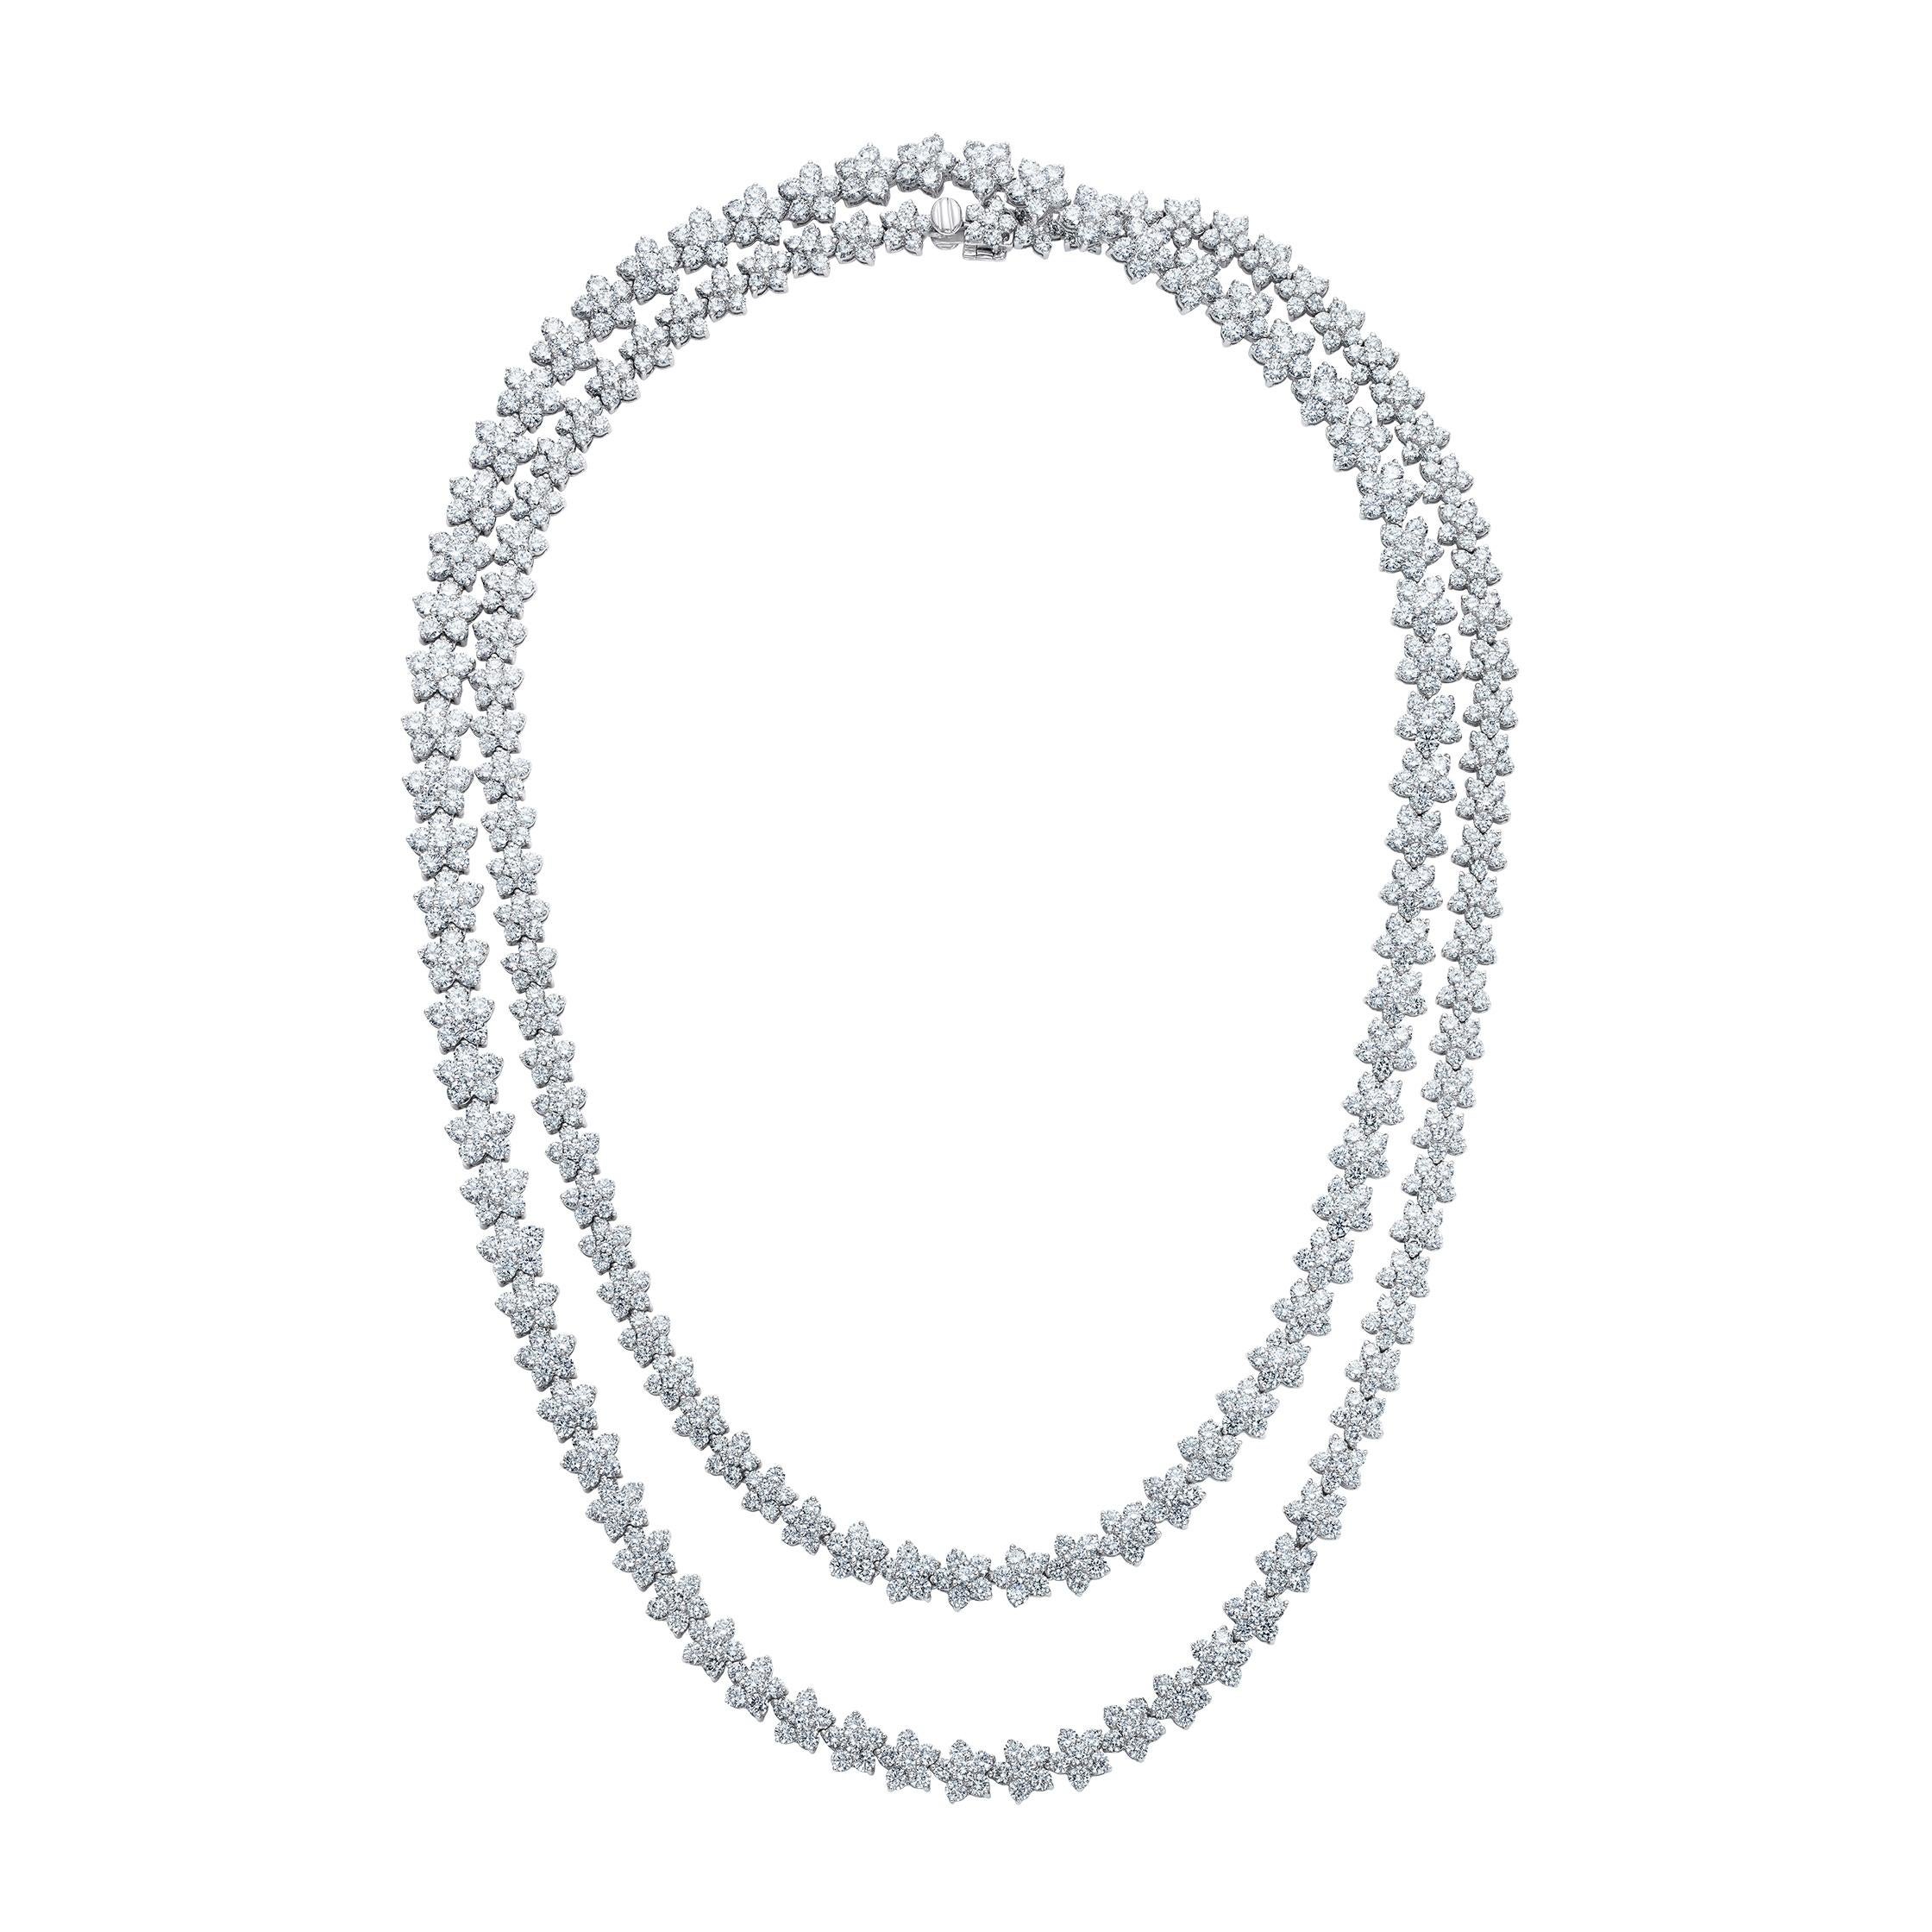 A stunning shimmering opera length necklace measuring 37 inches in total, made up of pretty daisy style clusters of collection quality diamonds.

- 888 white diamonds totalling 37.30 carats
- Created in 18K white gold

A mesmerising piece of jewelry